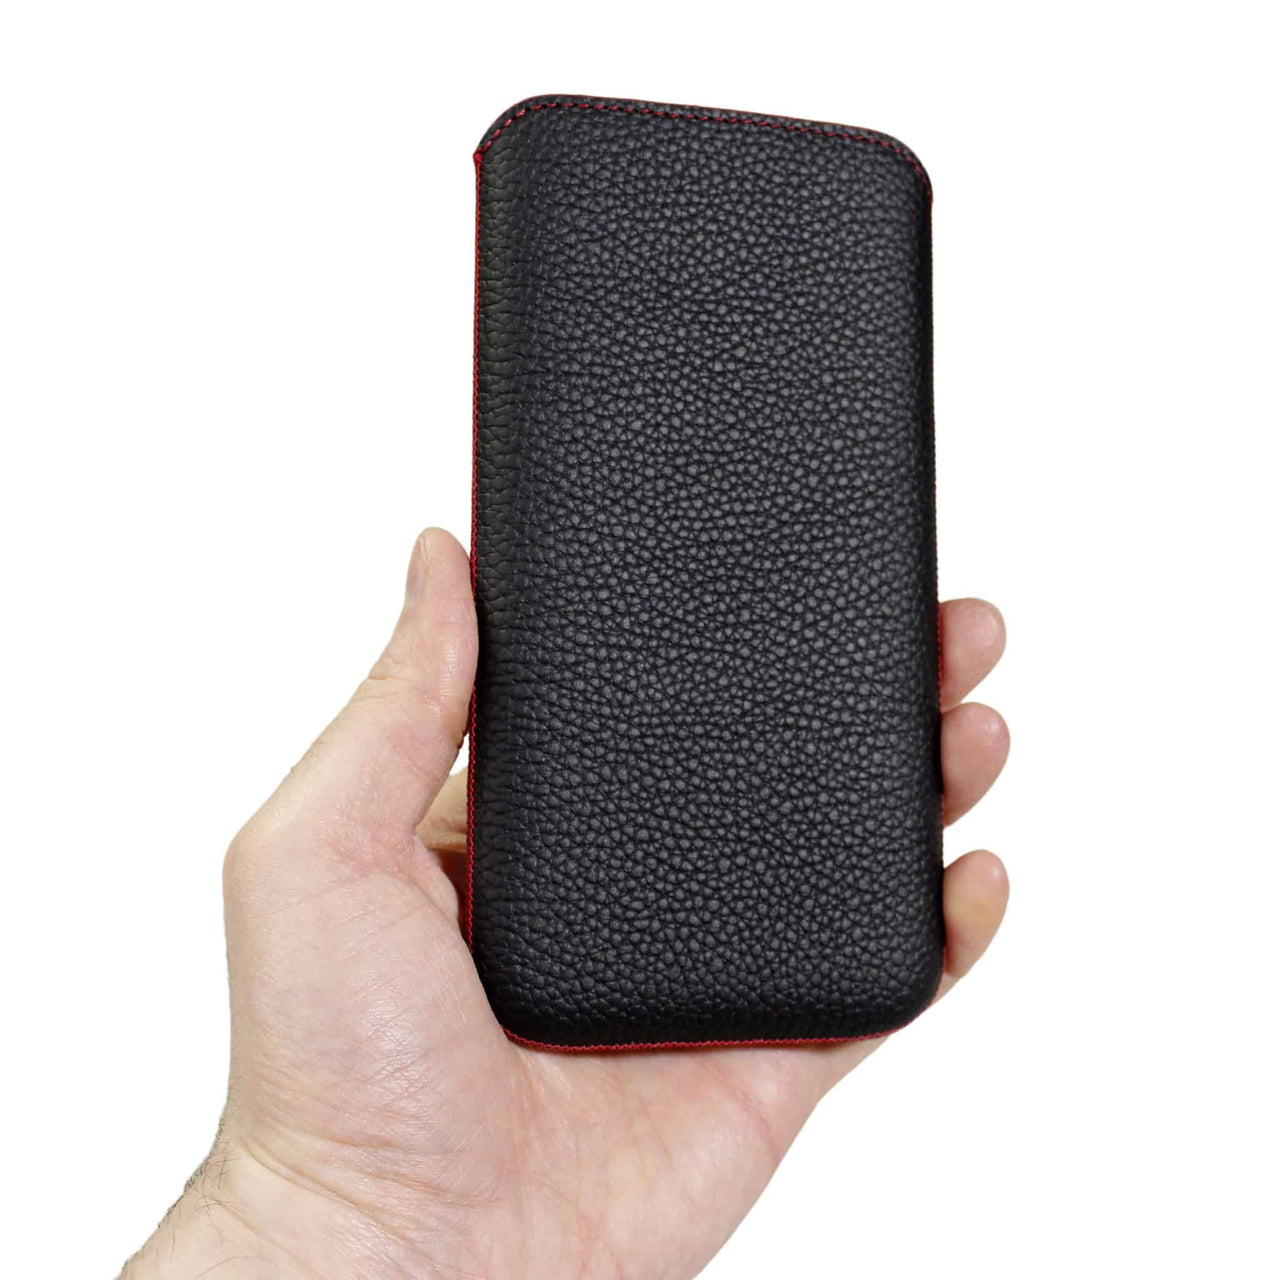 iPhone 11 Genuine Leather Pouch Sleeve Case | Artisanpouch